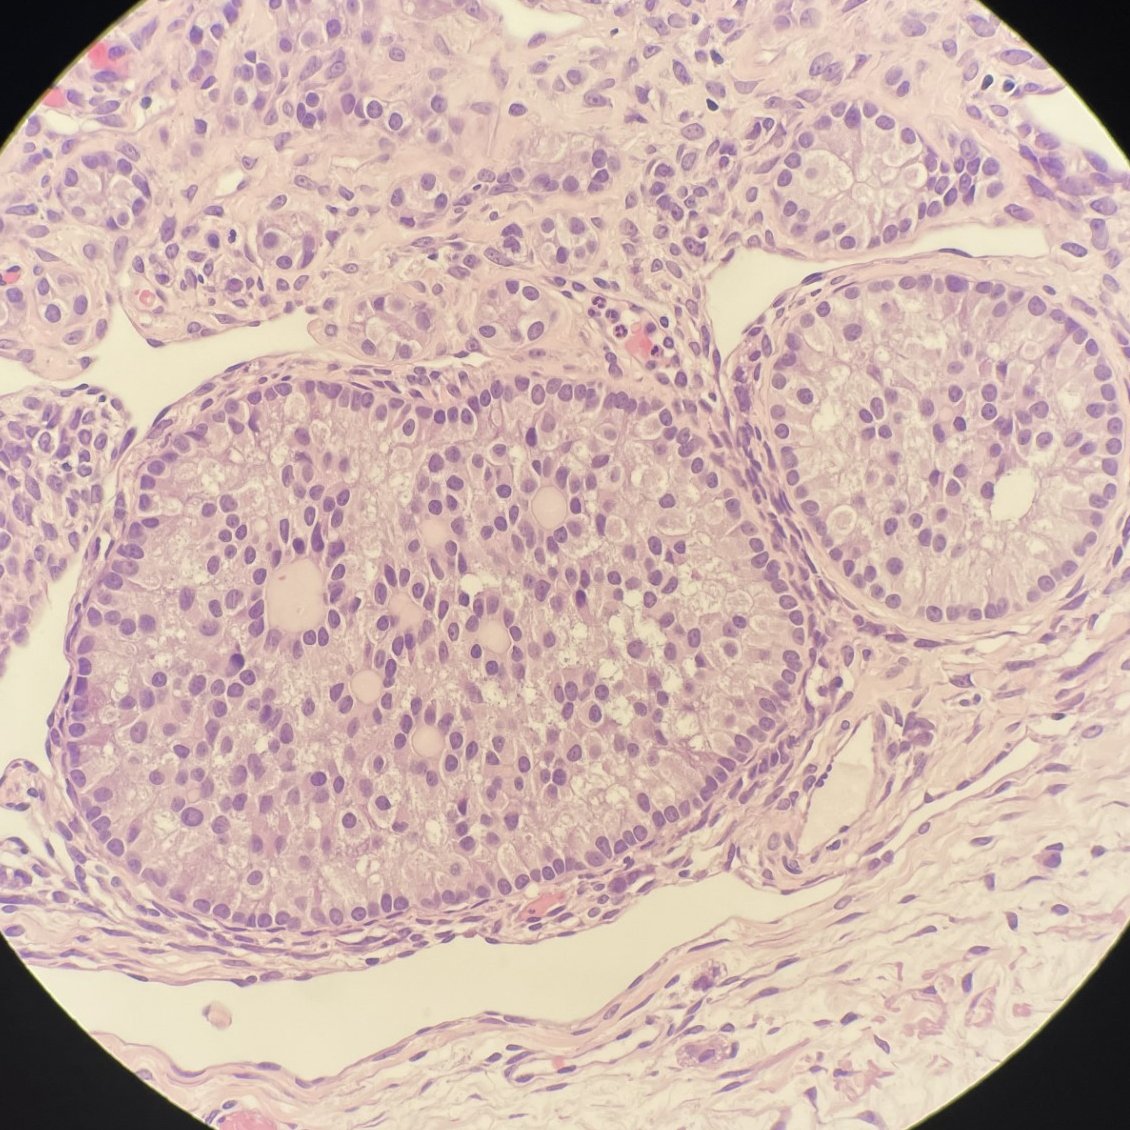 A+++ to the person who can dunk this diagnosis with a few clues 🔎 bilateral ovarian lesions 🔎 associated with Peutz-Jeghers syndrome 🔎 has STK11 mutation #GYNPath #PathTwitter #PathX